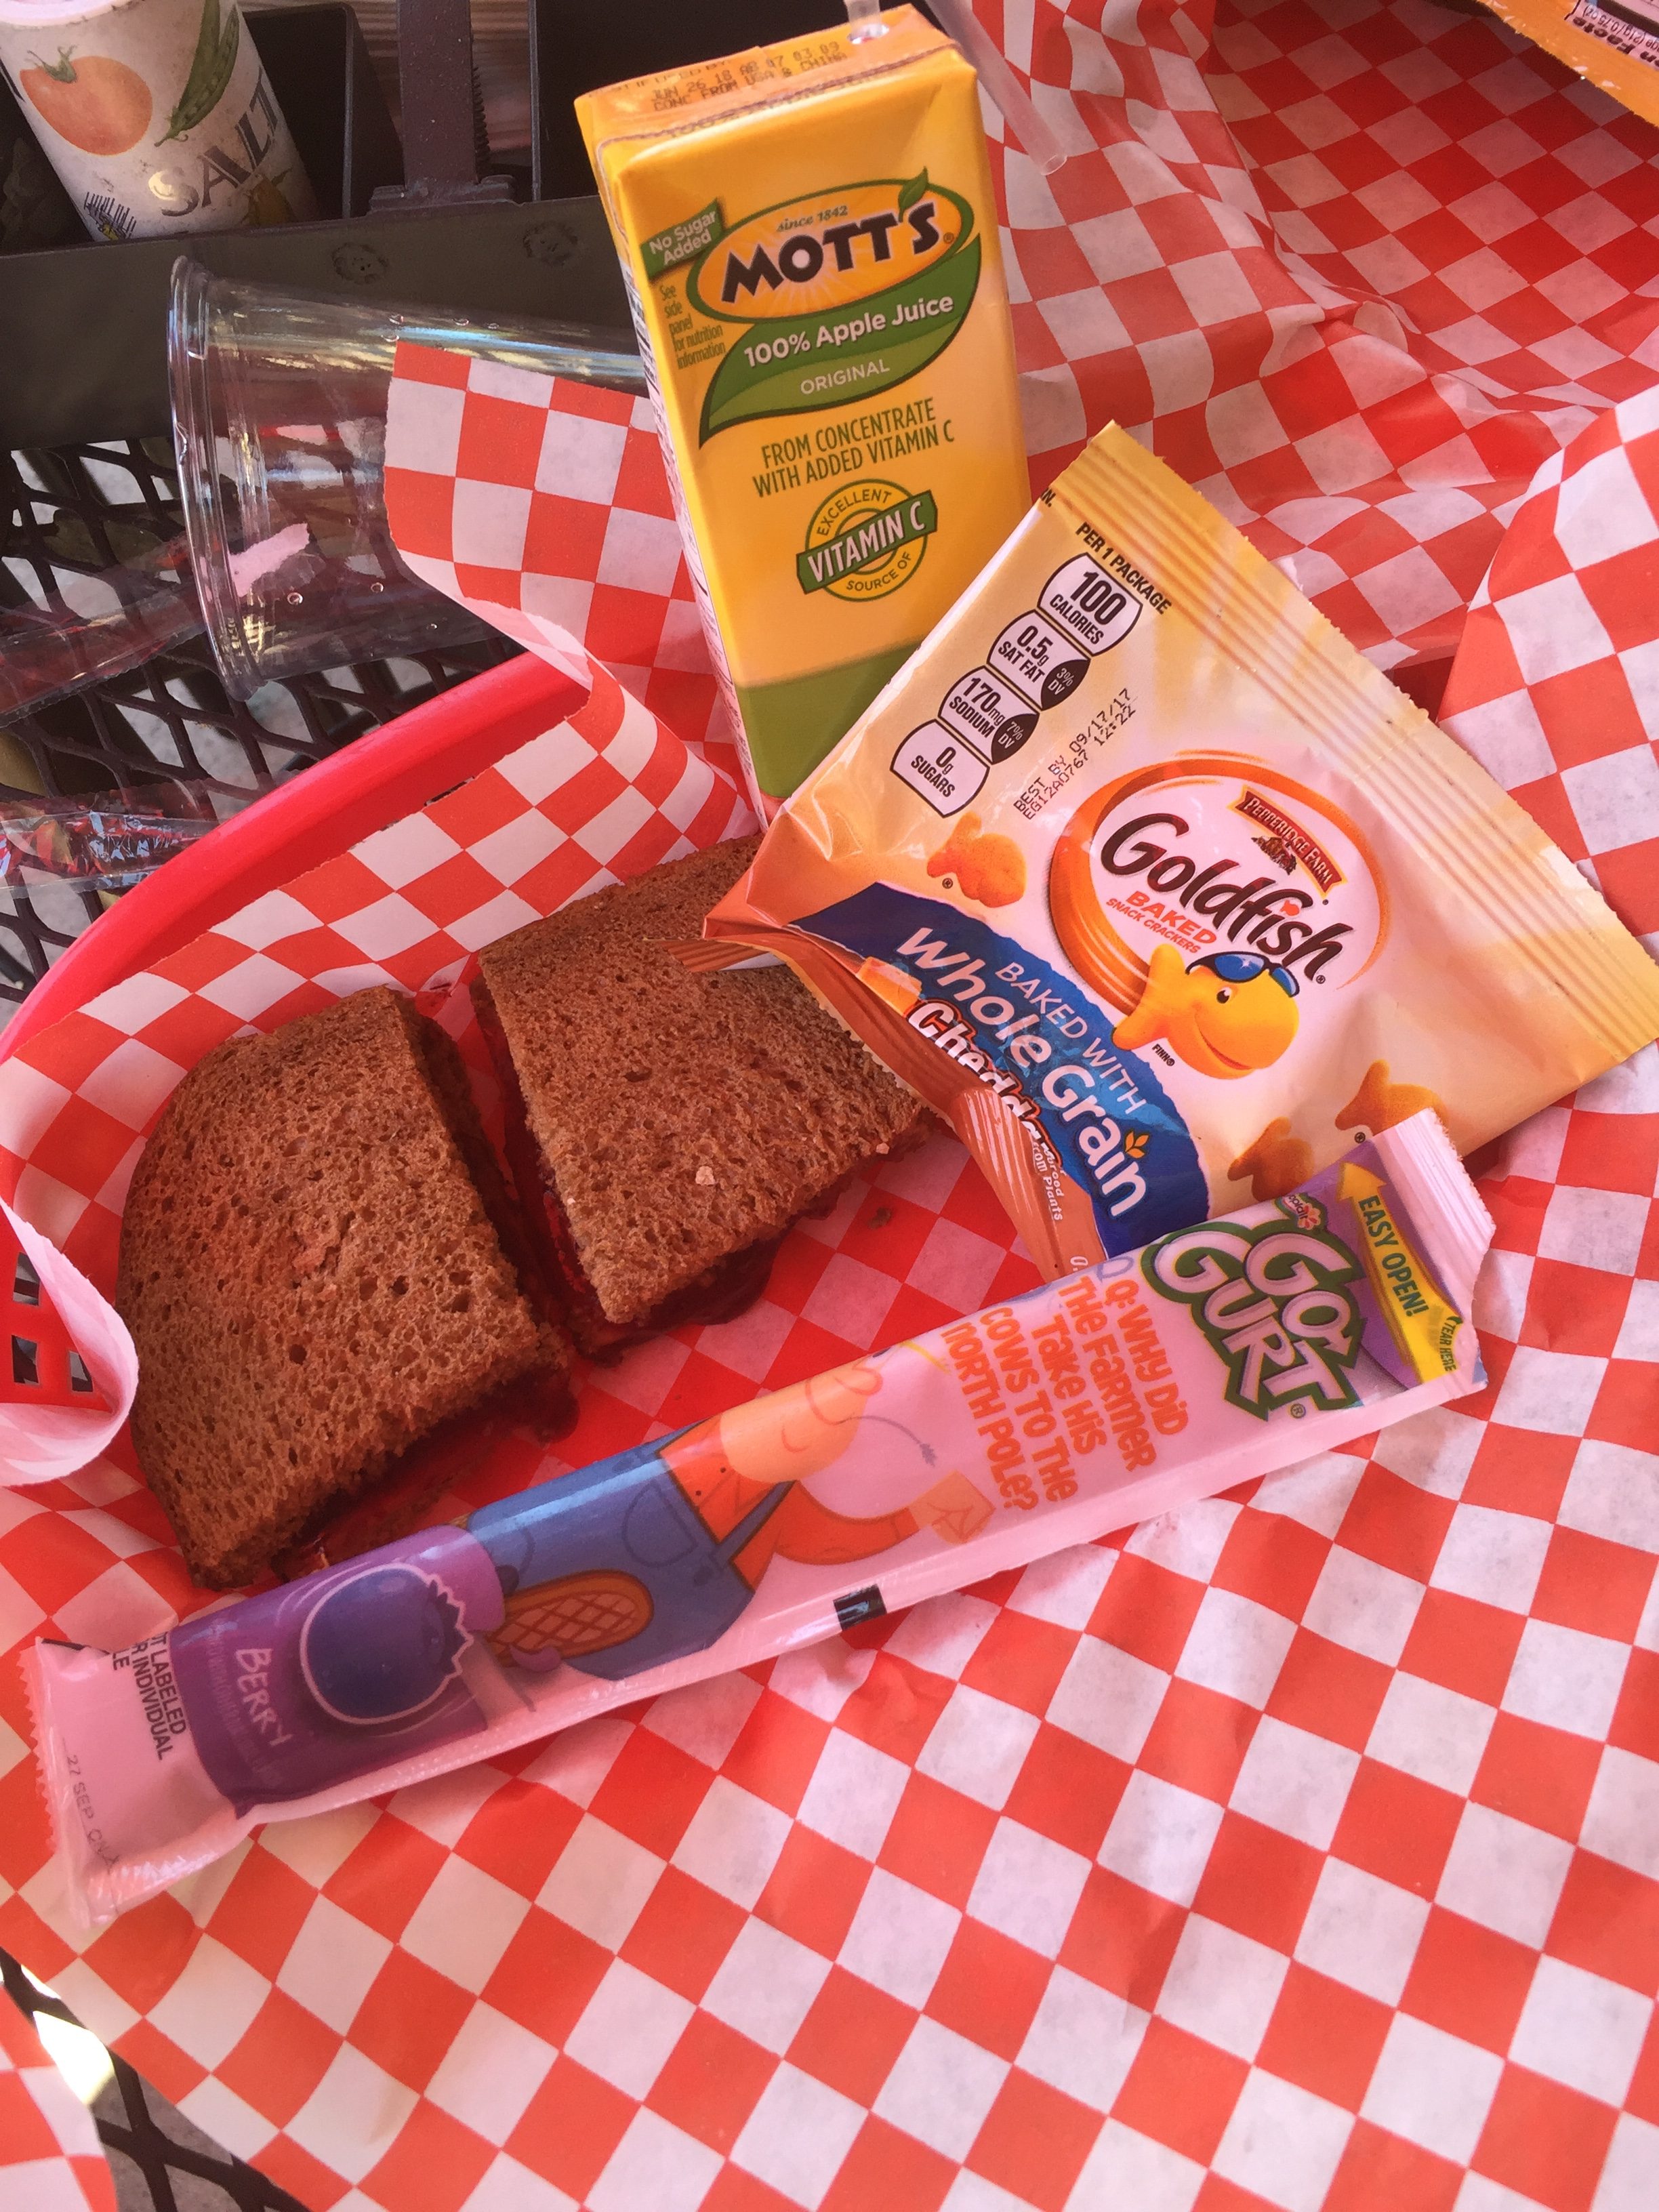 Kids Meal at Red Scooter Deli in Paso Robles California